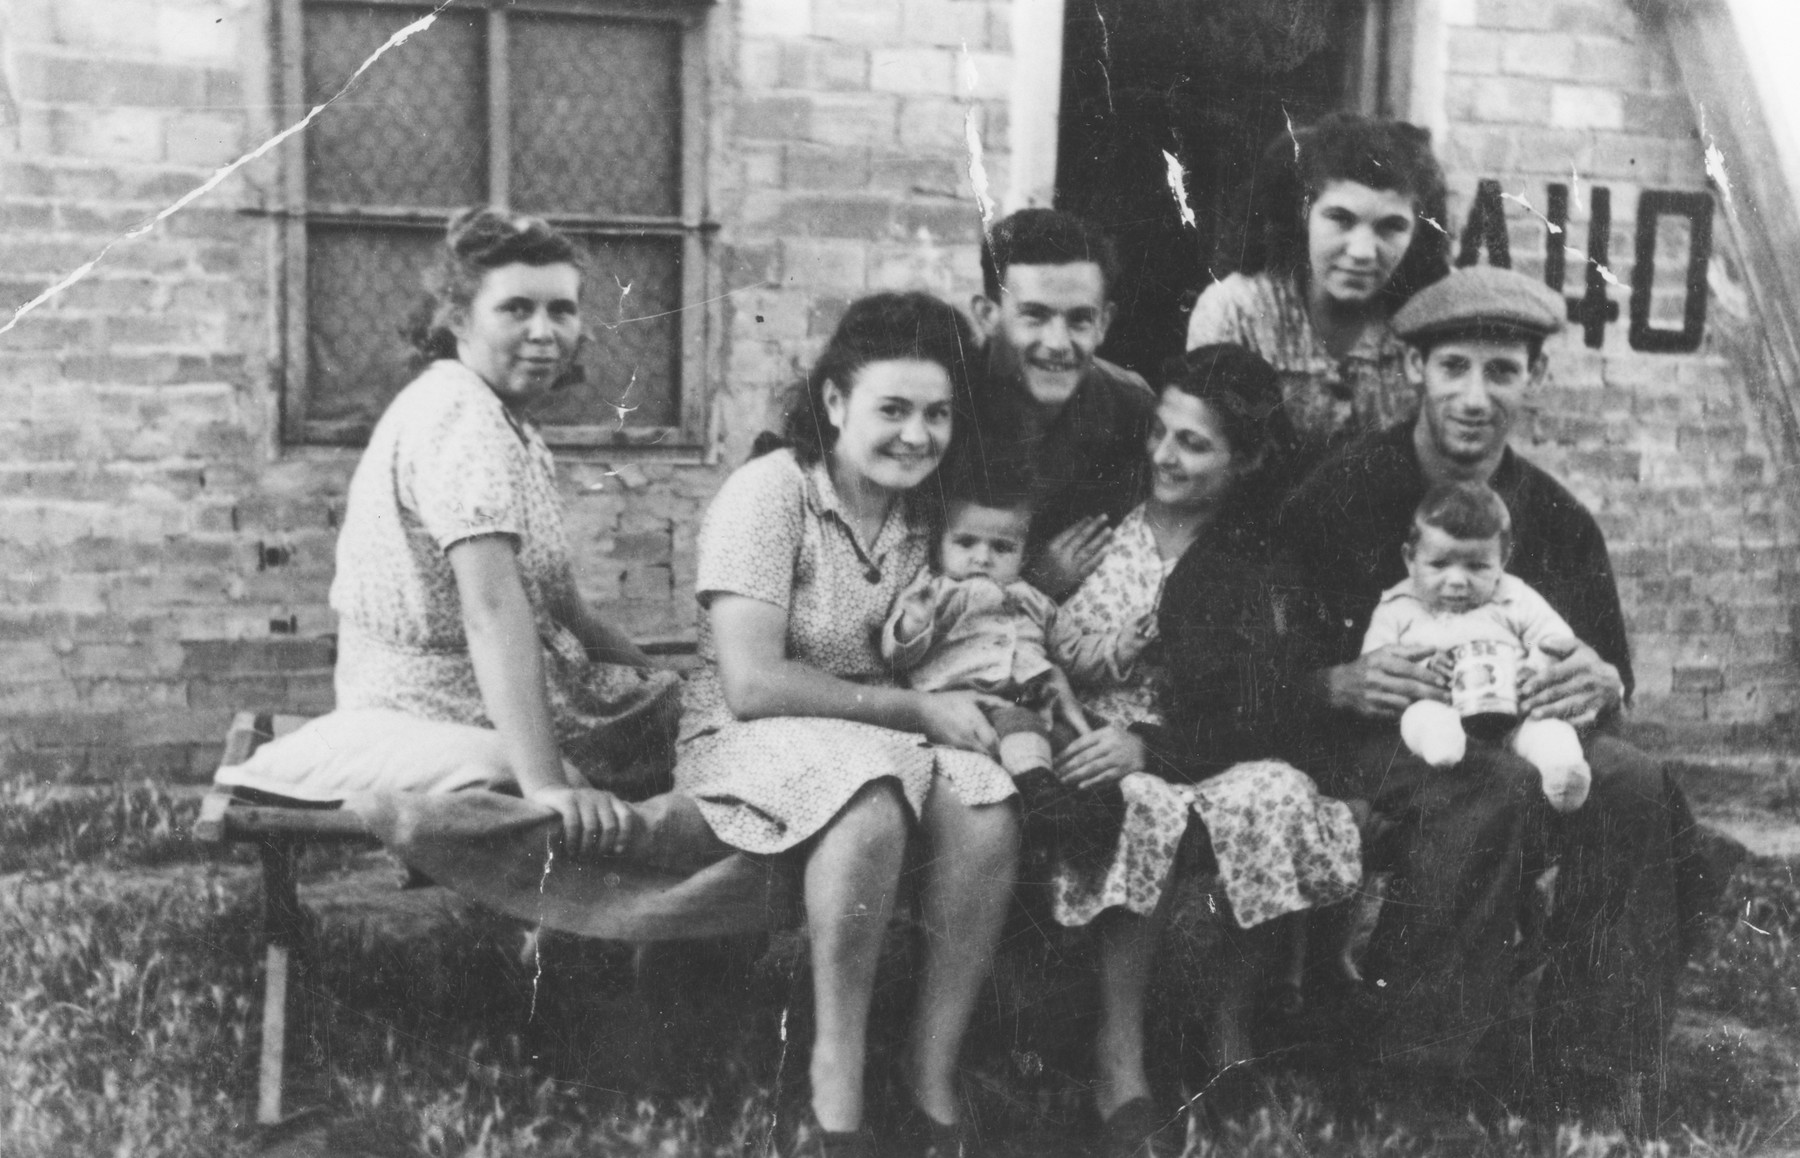 Group portrait of Jewish DPs outside a barracks in the Bari displaced persons camp.

Among those pictured are Izidor and Tauba Schachter with their baby Miriam Schachter (now Enright), on the far right; and Etta Gipsman (far left).  Etta  is wearing a dress made from fabric sent by relatives in America.